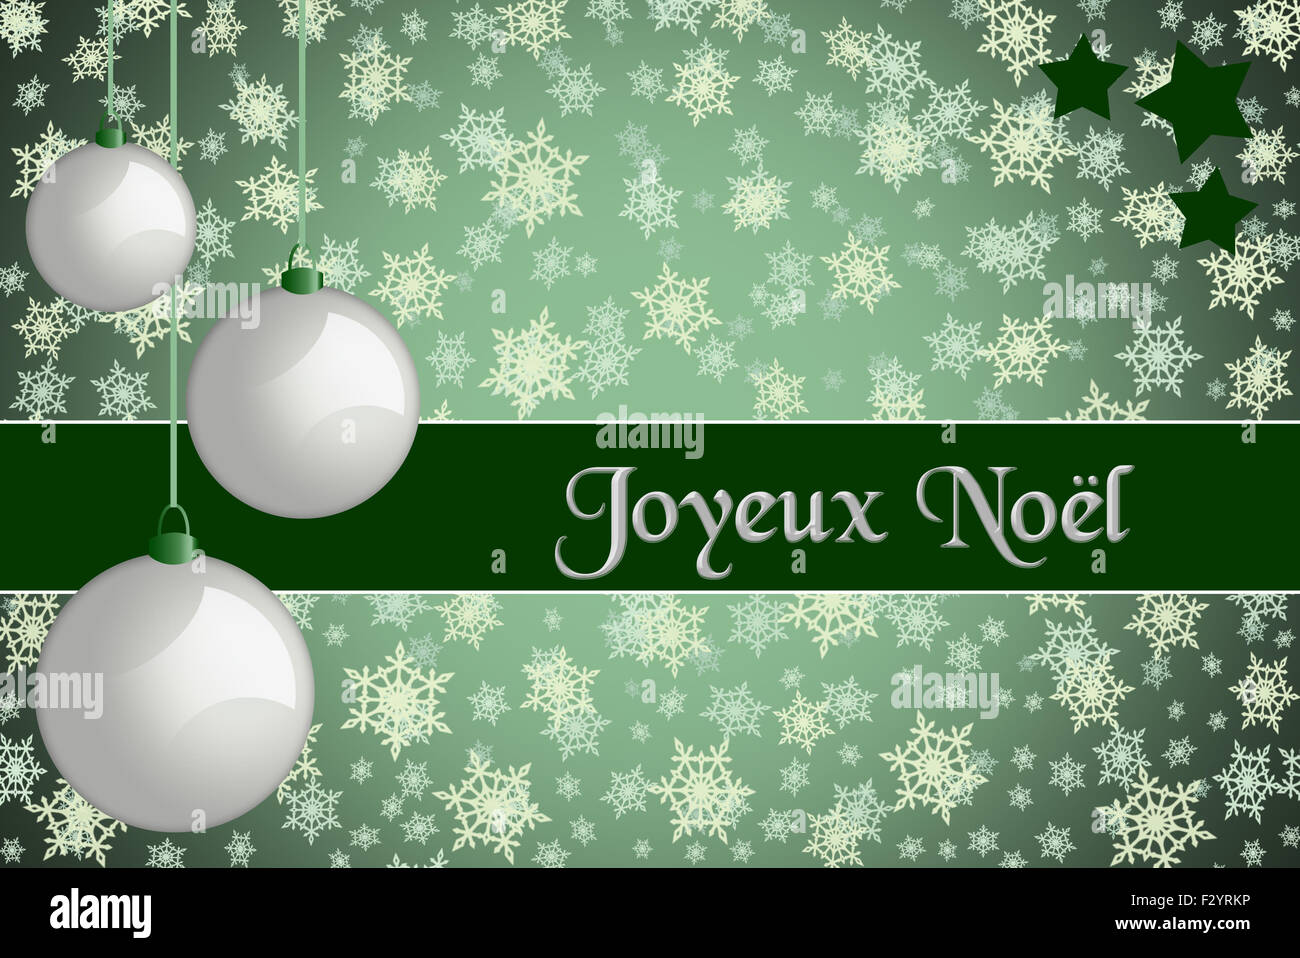 Christmas greeting card. 'Joyeux Noël' Green colored Christmas card with retro white baubles and snowflake background. Stock Photo